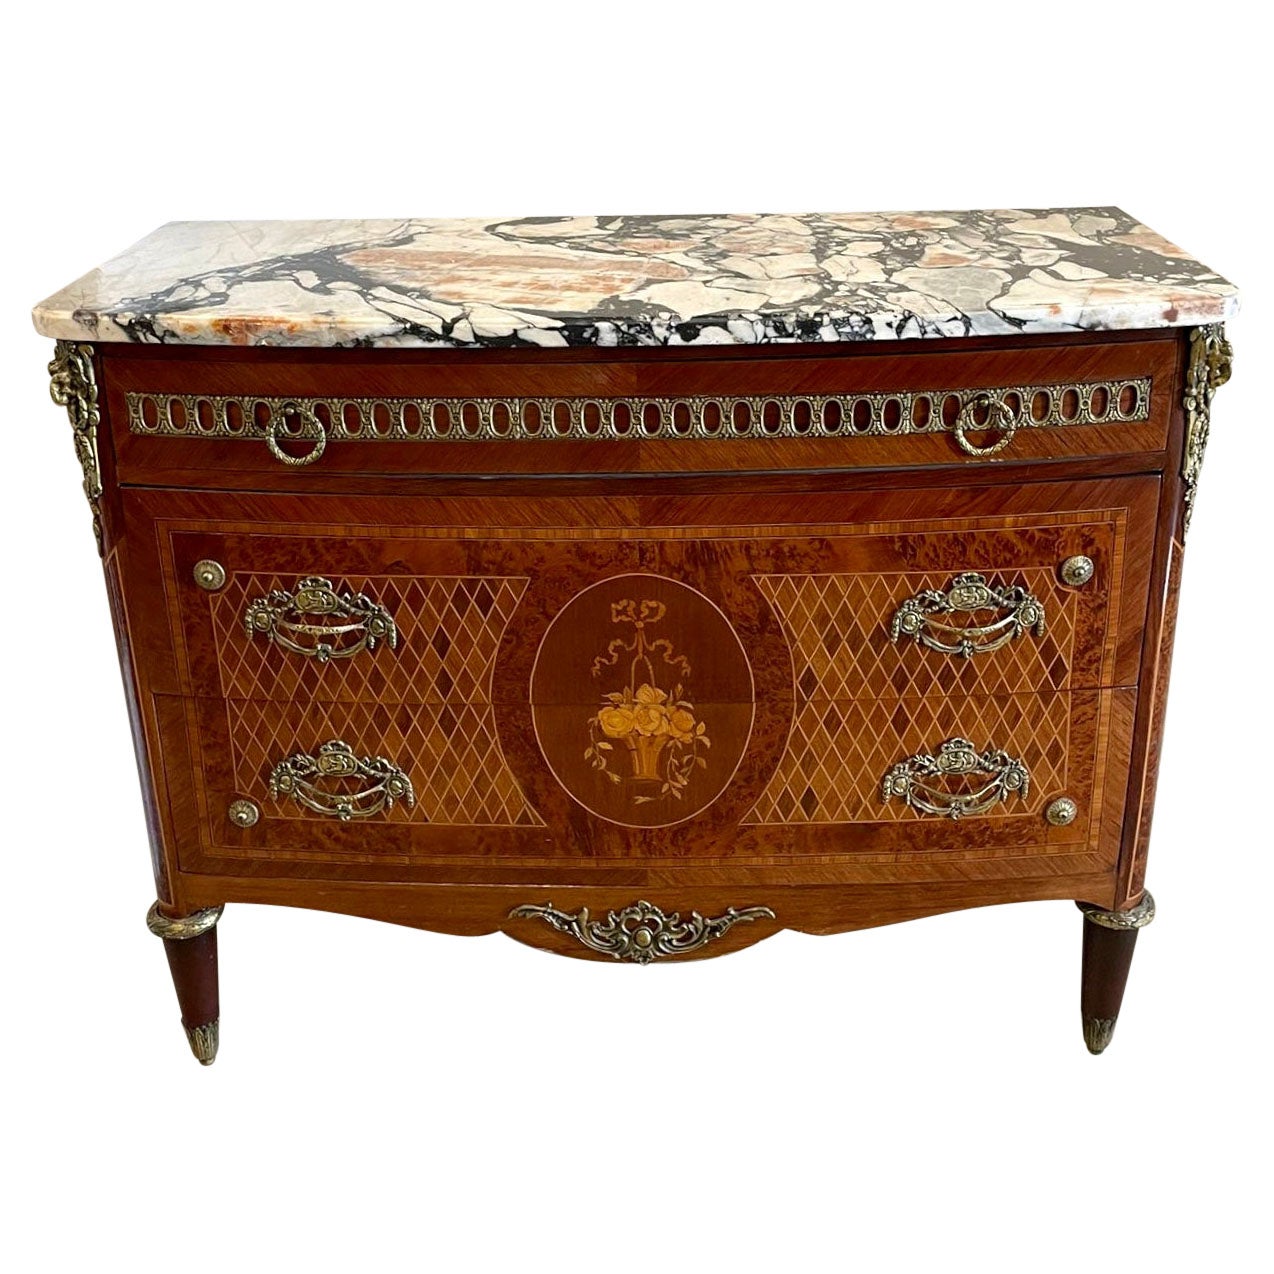 Antique Kingwood and Marquetry Inlaid Marble Top Commode/Chest of Drawers